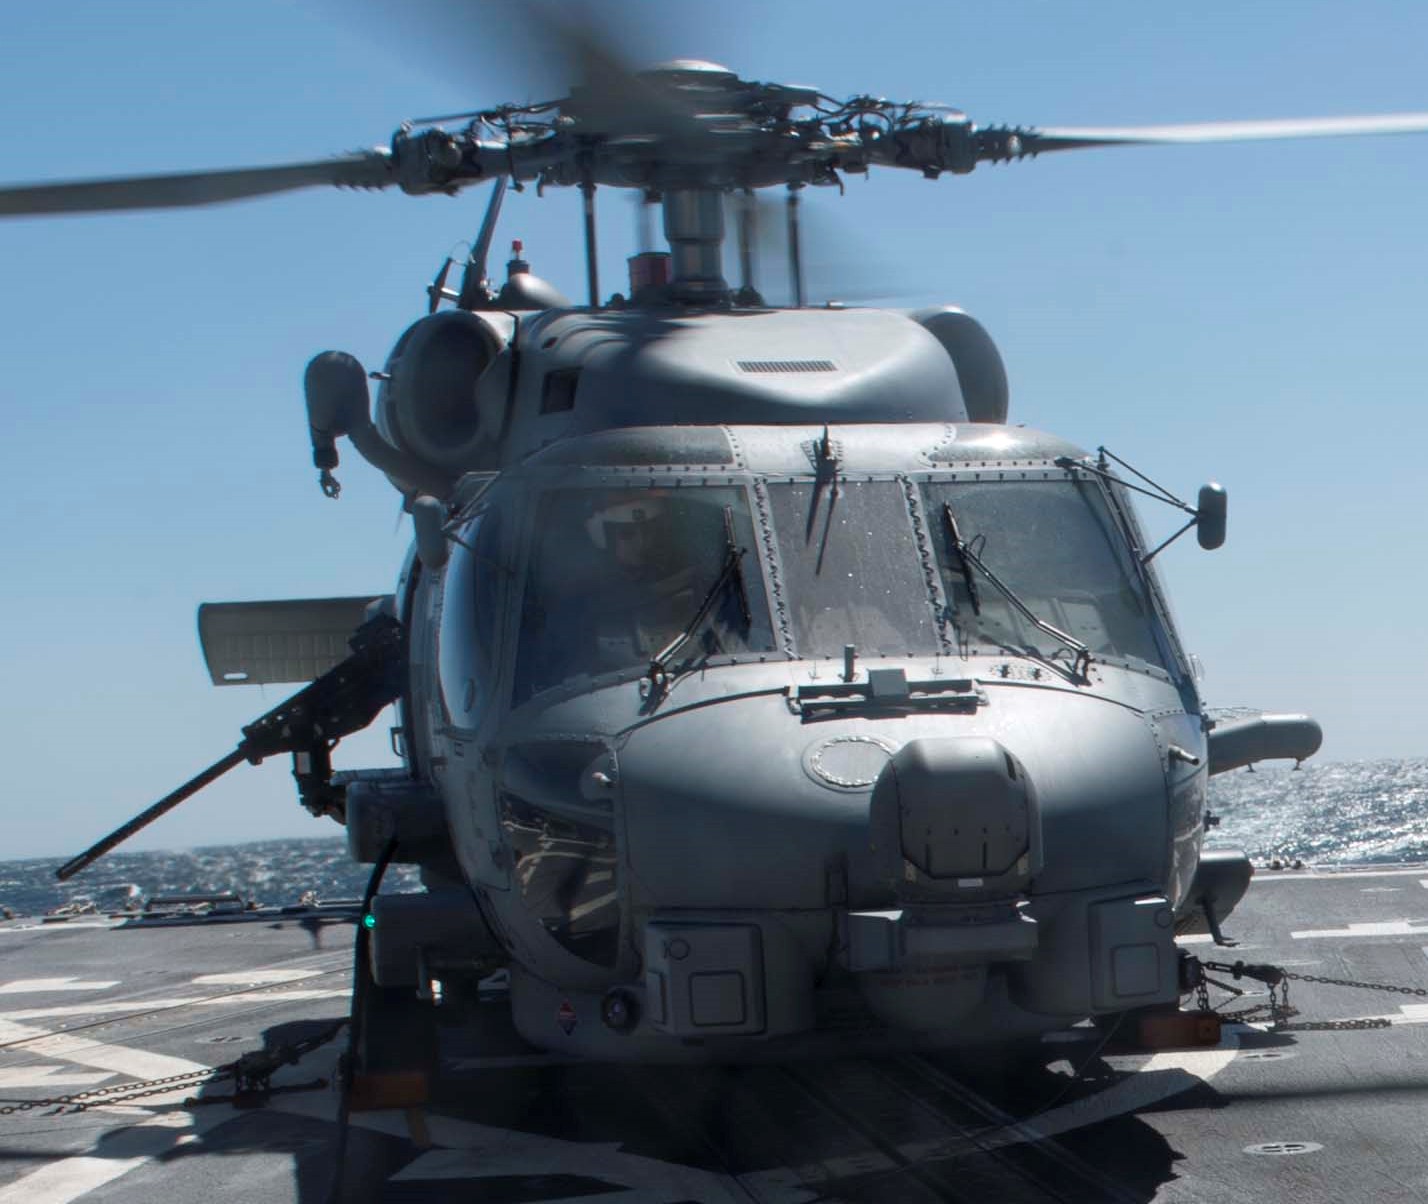 hsm-51 warlords helicopter maritime strike squadron mh-60r seahawk navy 2013 32